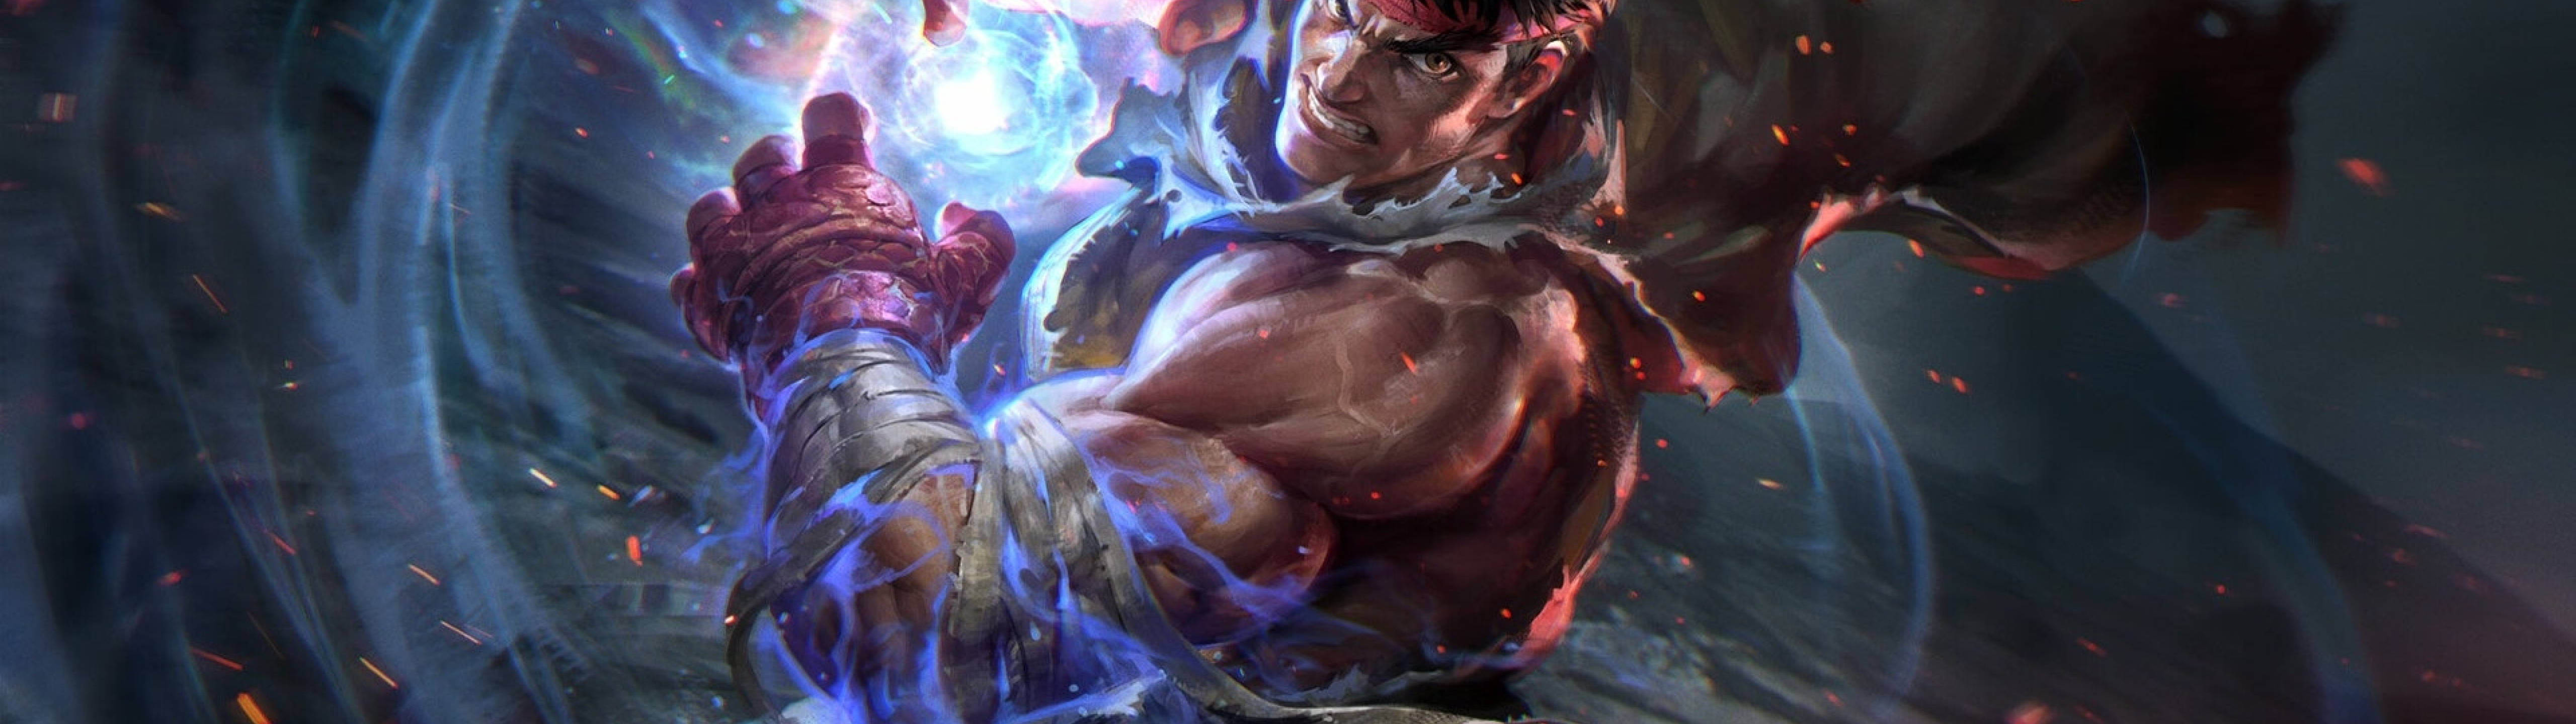 5120x1440 Game Ryu Street Fighter Background